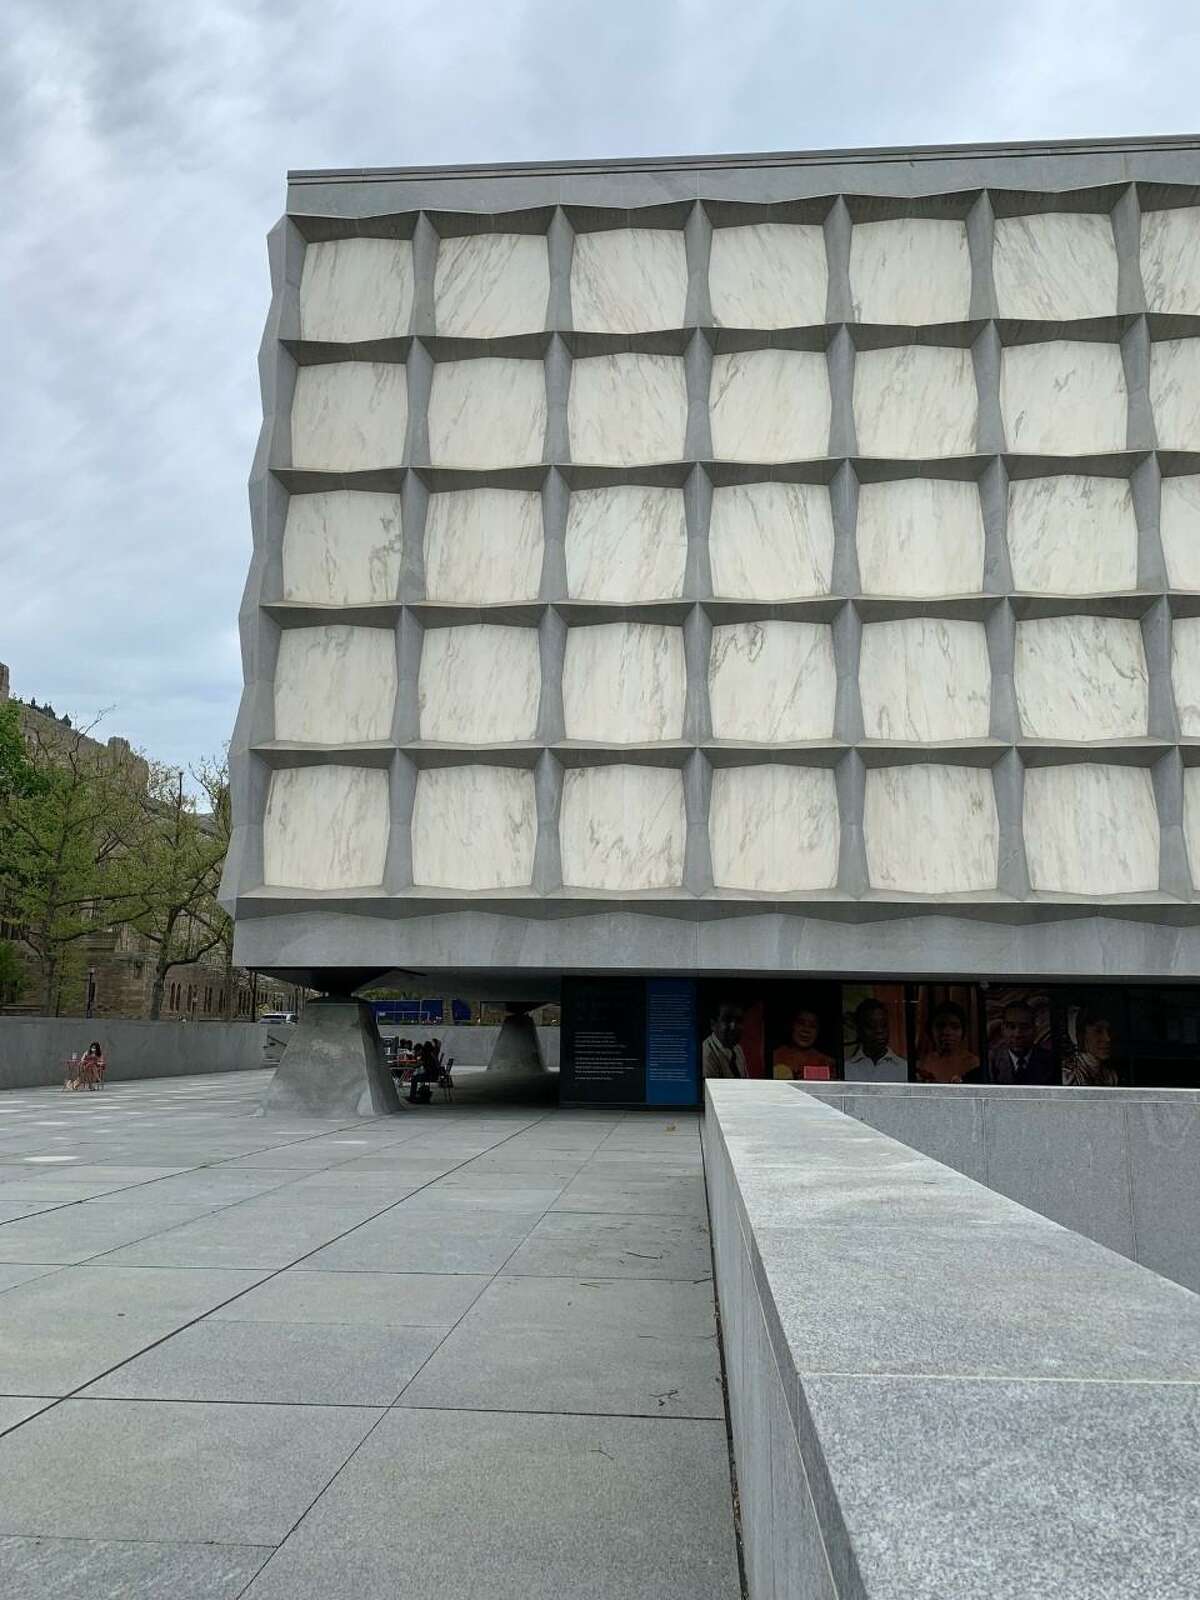 The Beinecke Rare Book Library is part of the Yale University campus.